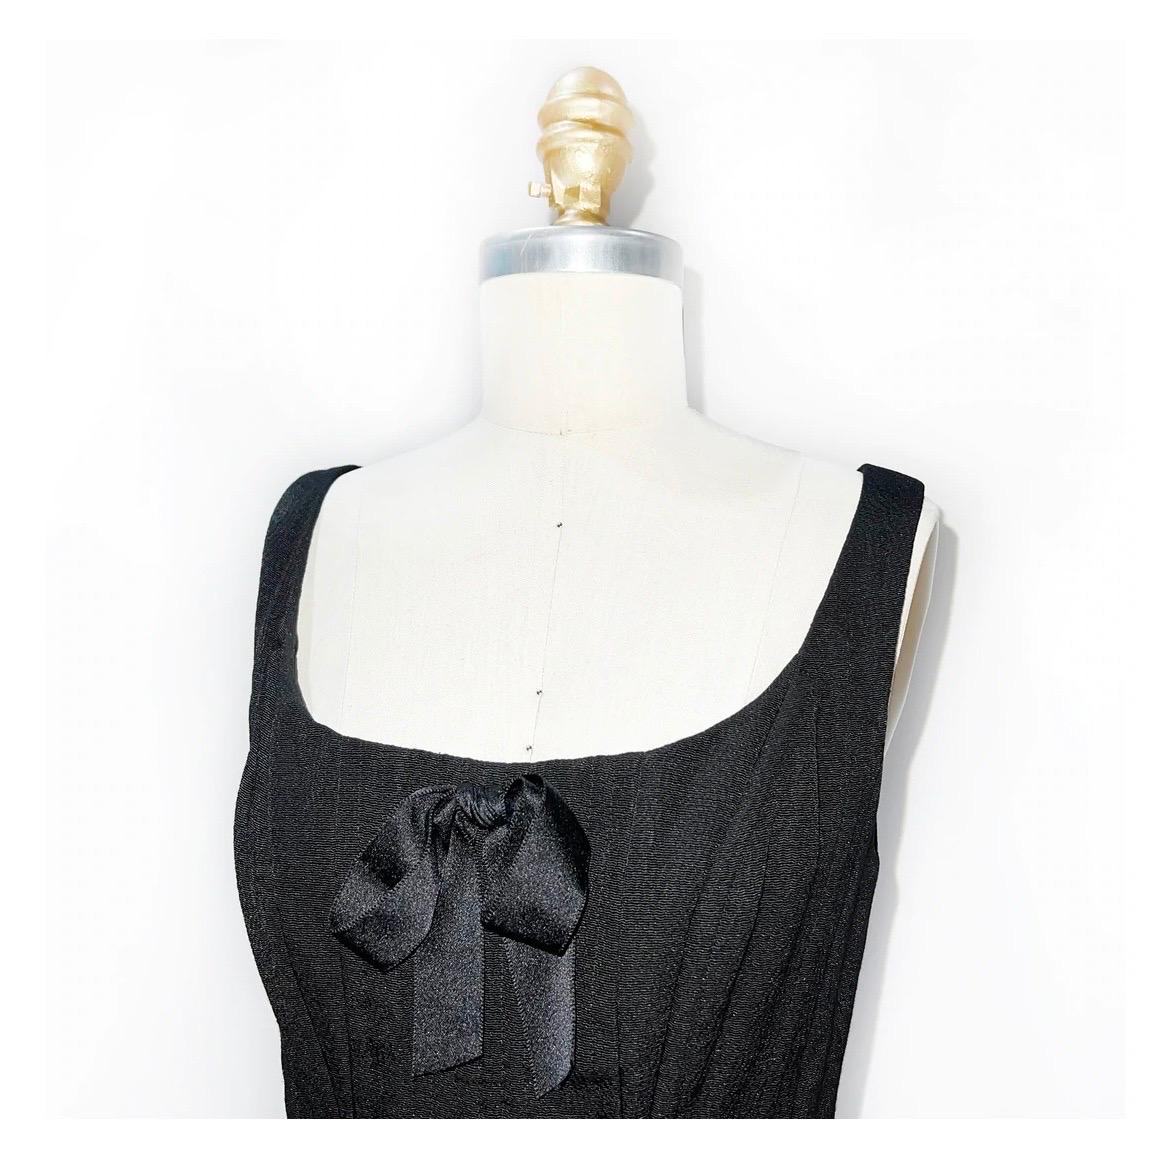 Chanel by Karl Lagerfeld Bustier 
Spring / Summer 1993 
Look 100 
Made in France
Vintage 
Black 
Tank style straps with open neckline 
Corset boning inside bustier for support 
Black satin bow at bustline 
Black satin detailing at pockets and at